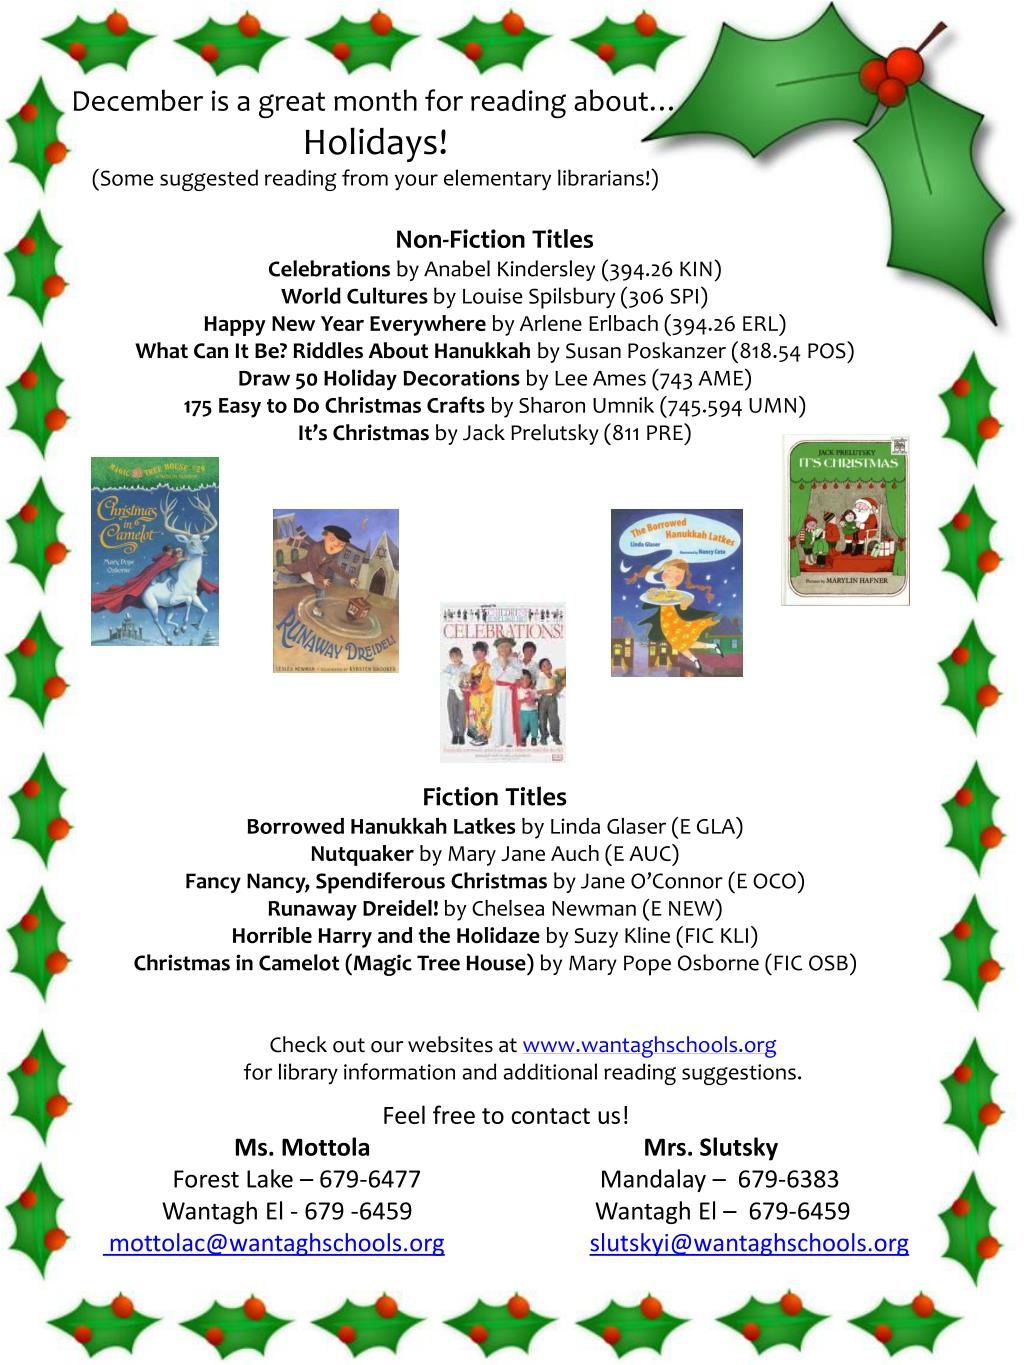 PPT - December is a great month for reading about… Holidays! PowerPoint ...